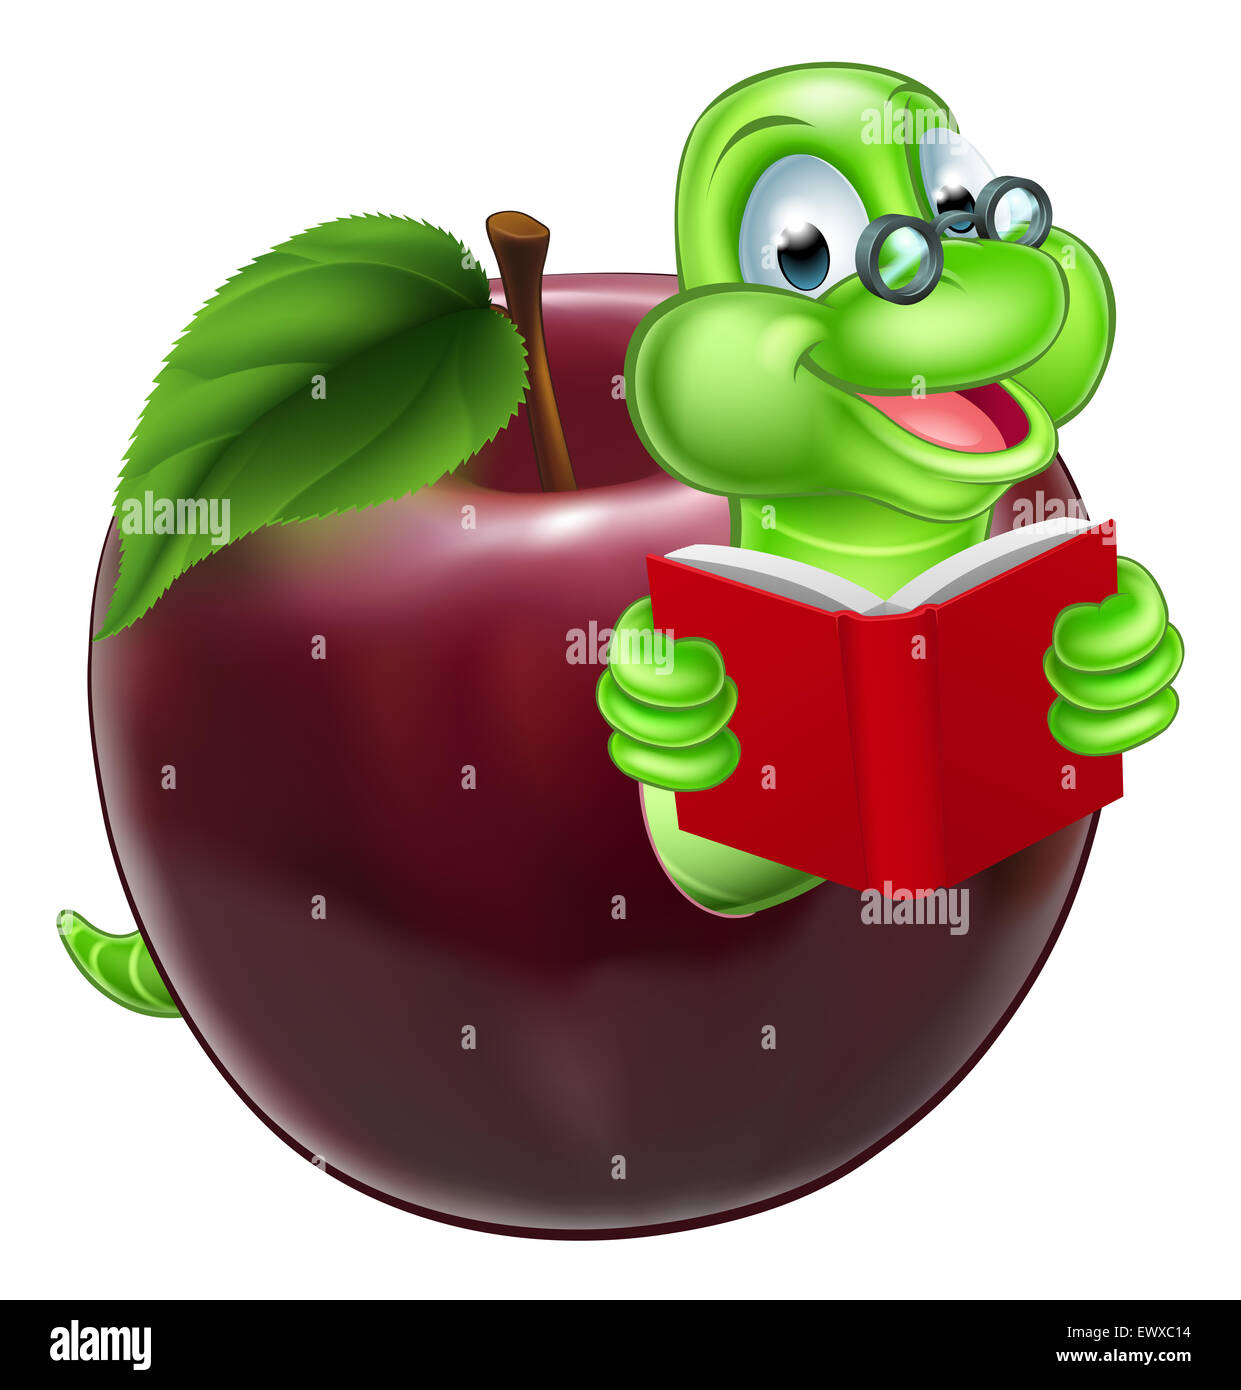 A happy cute cartoon caterpillar bookworm worm or caterpillar reading a book and coming out of an apple and wearing glasses Stock Photo